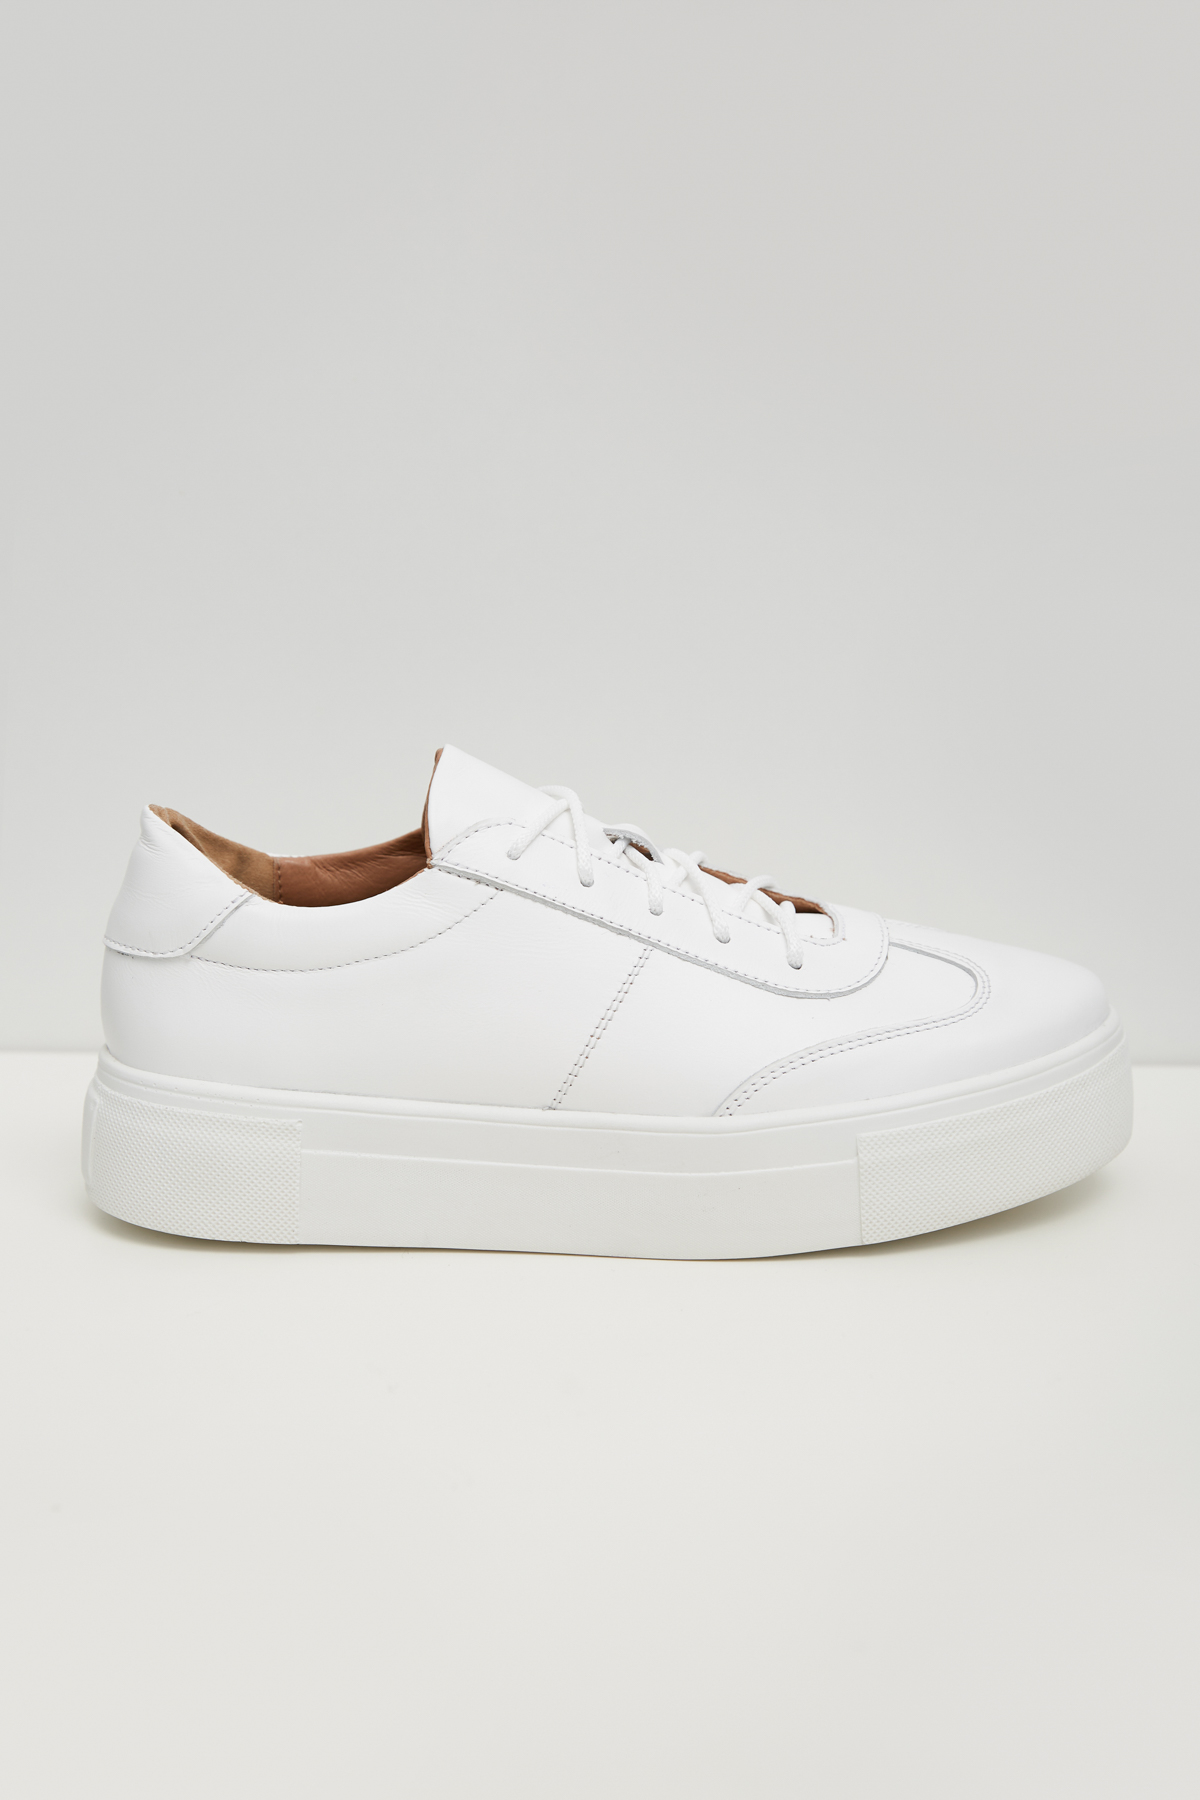 White leather sneakers with thick soles, photo 2